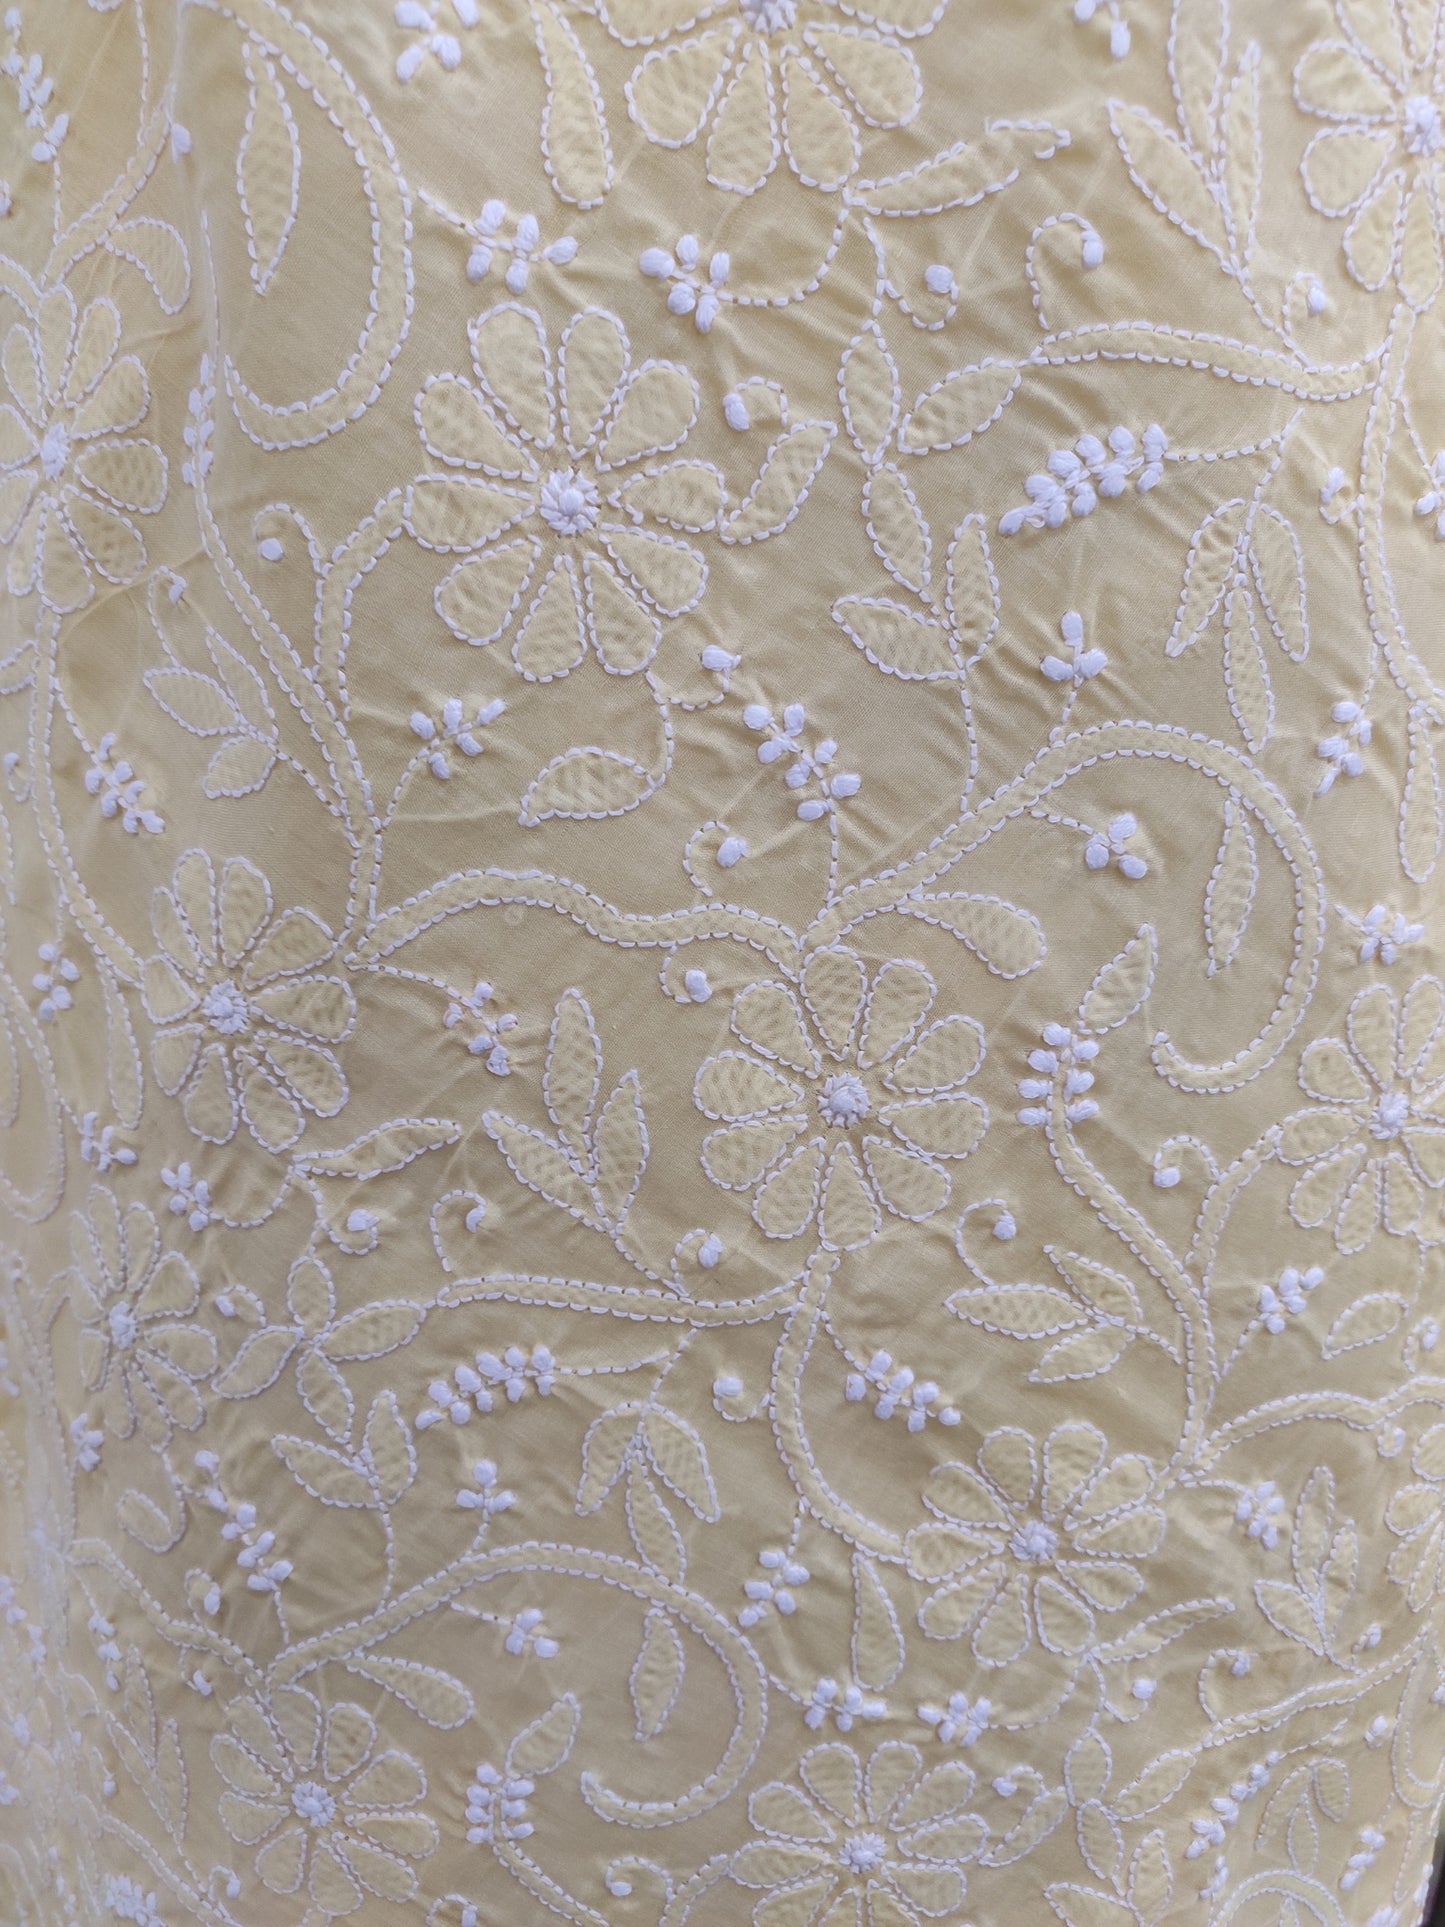 Shyamal Chikan Hand Embroidered Yellow Cotton Lucknowi Chikankari Heavy Palla Saree With Blouse Piece- S22531